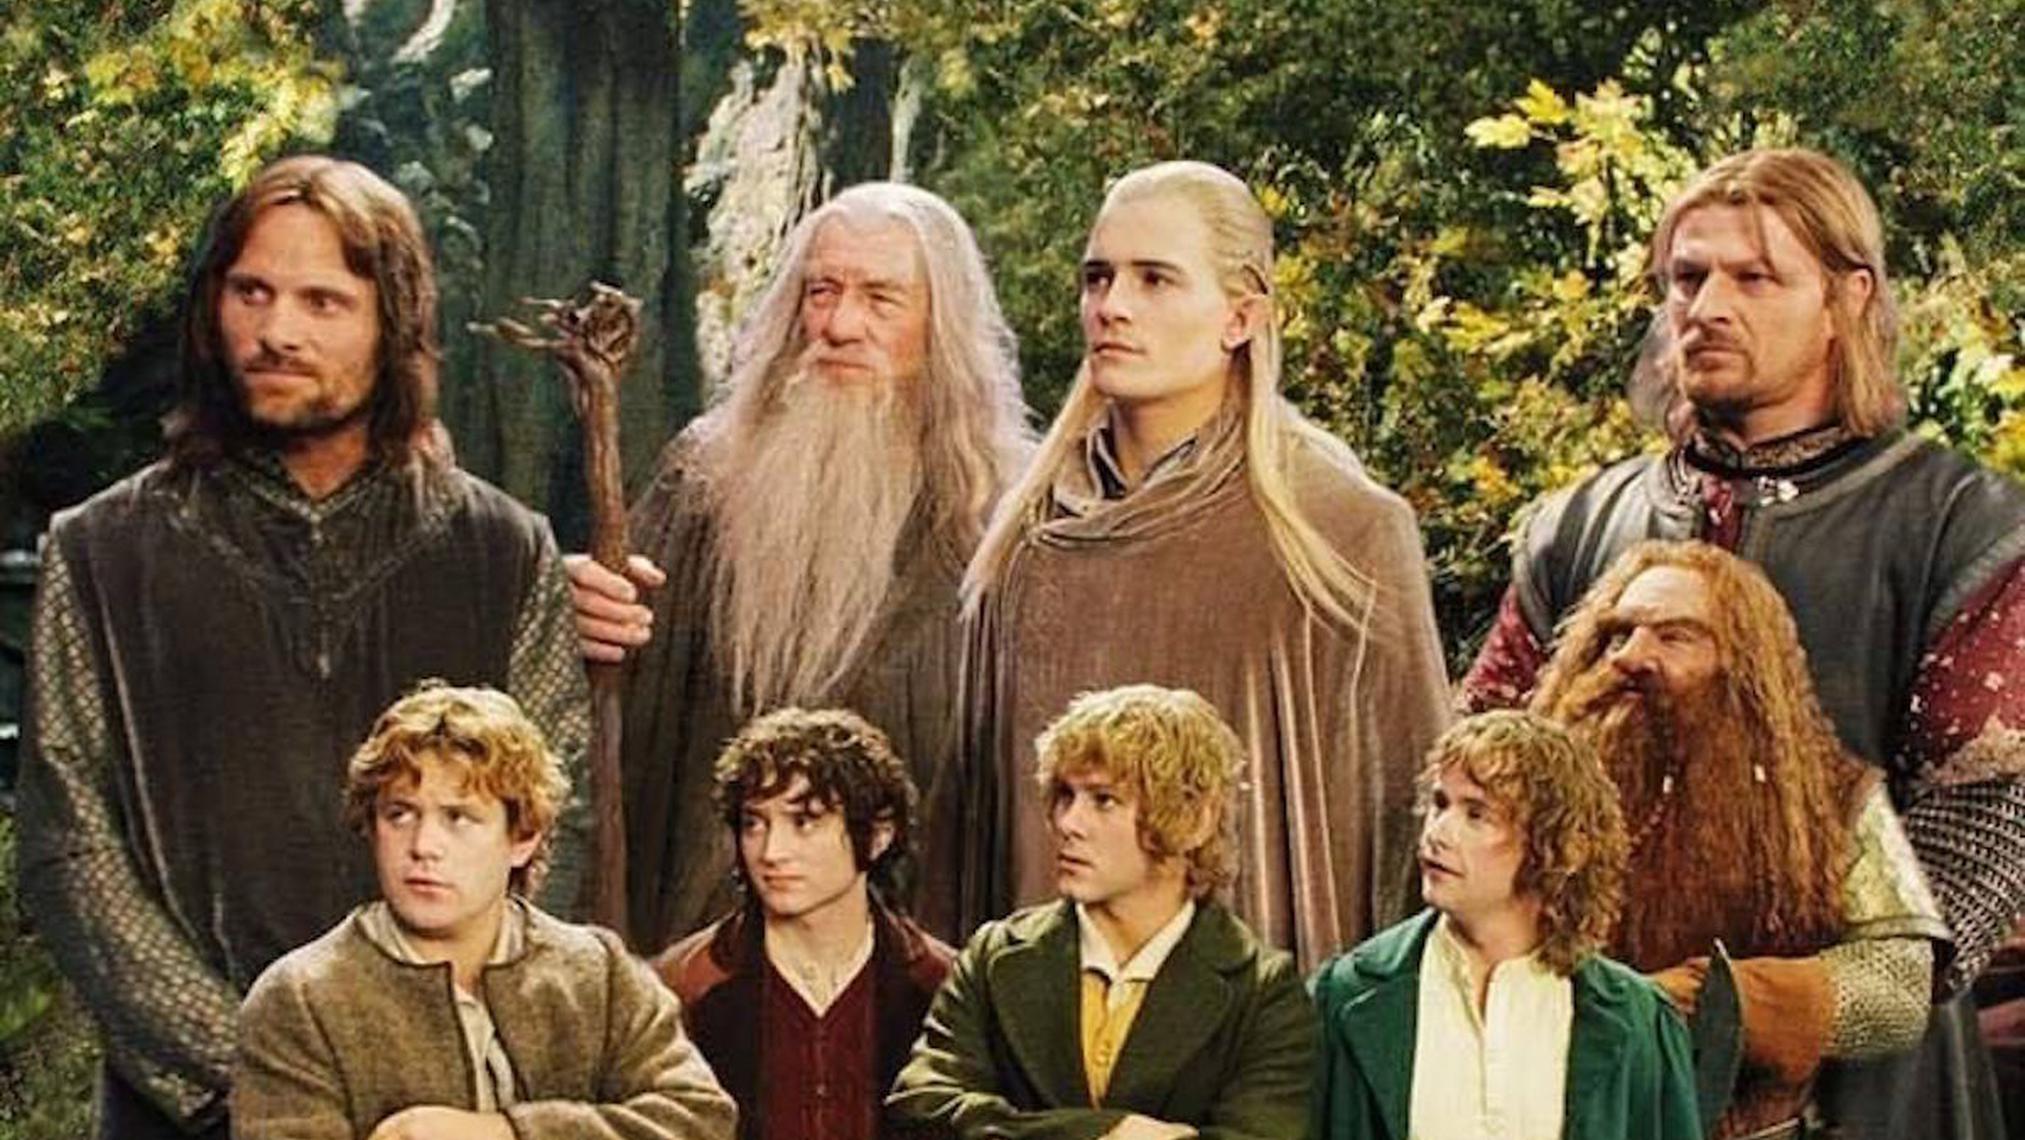 s Lord of the Rings TV Series Adds 20 New Cast Members - IGN